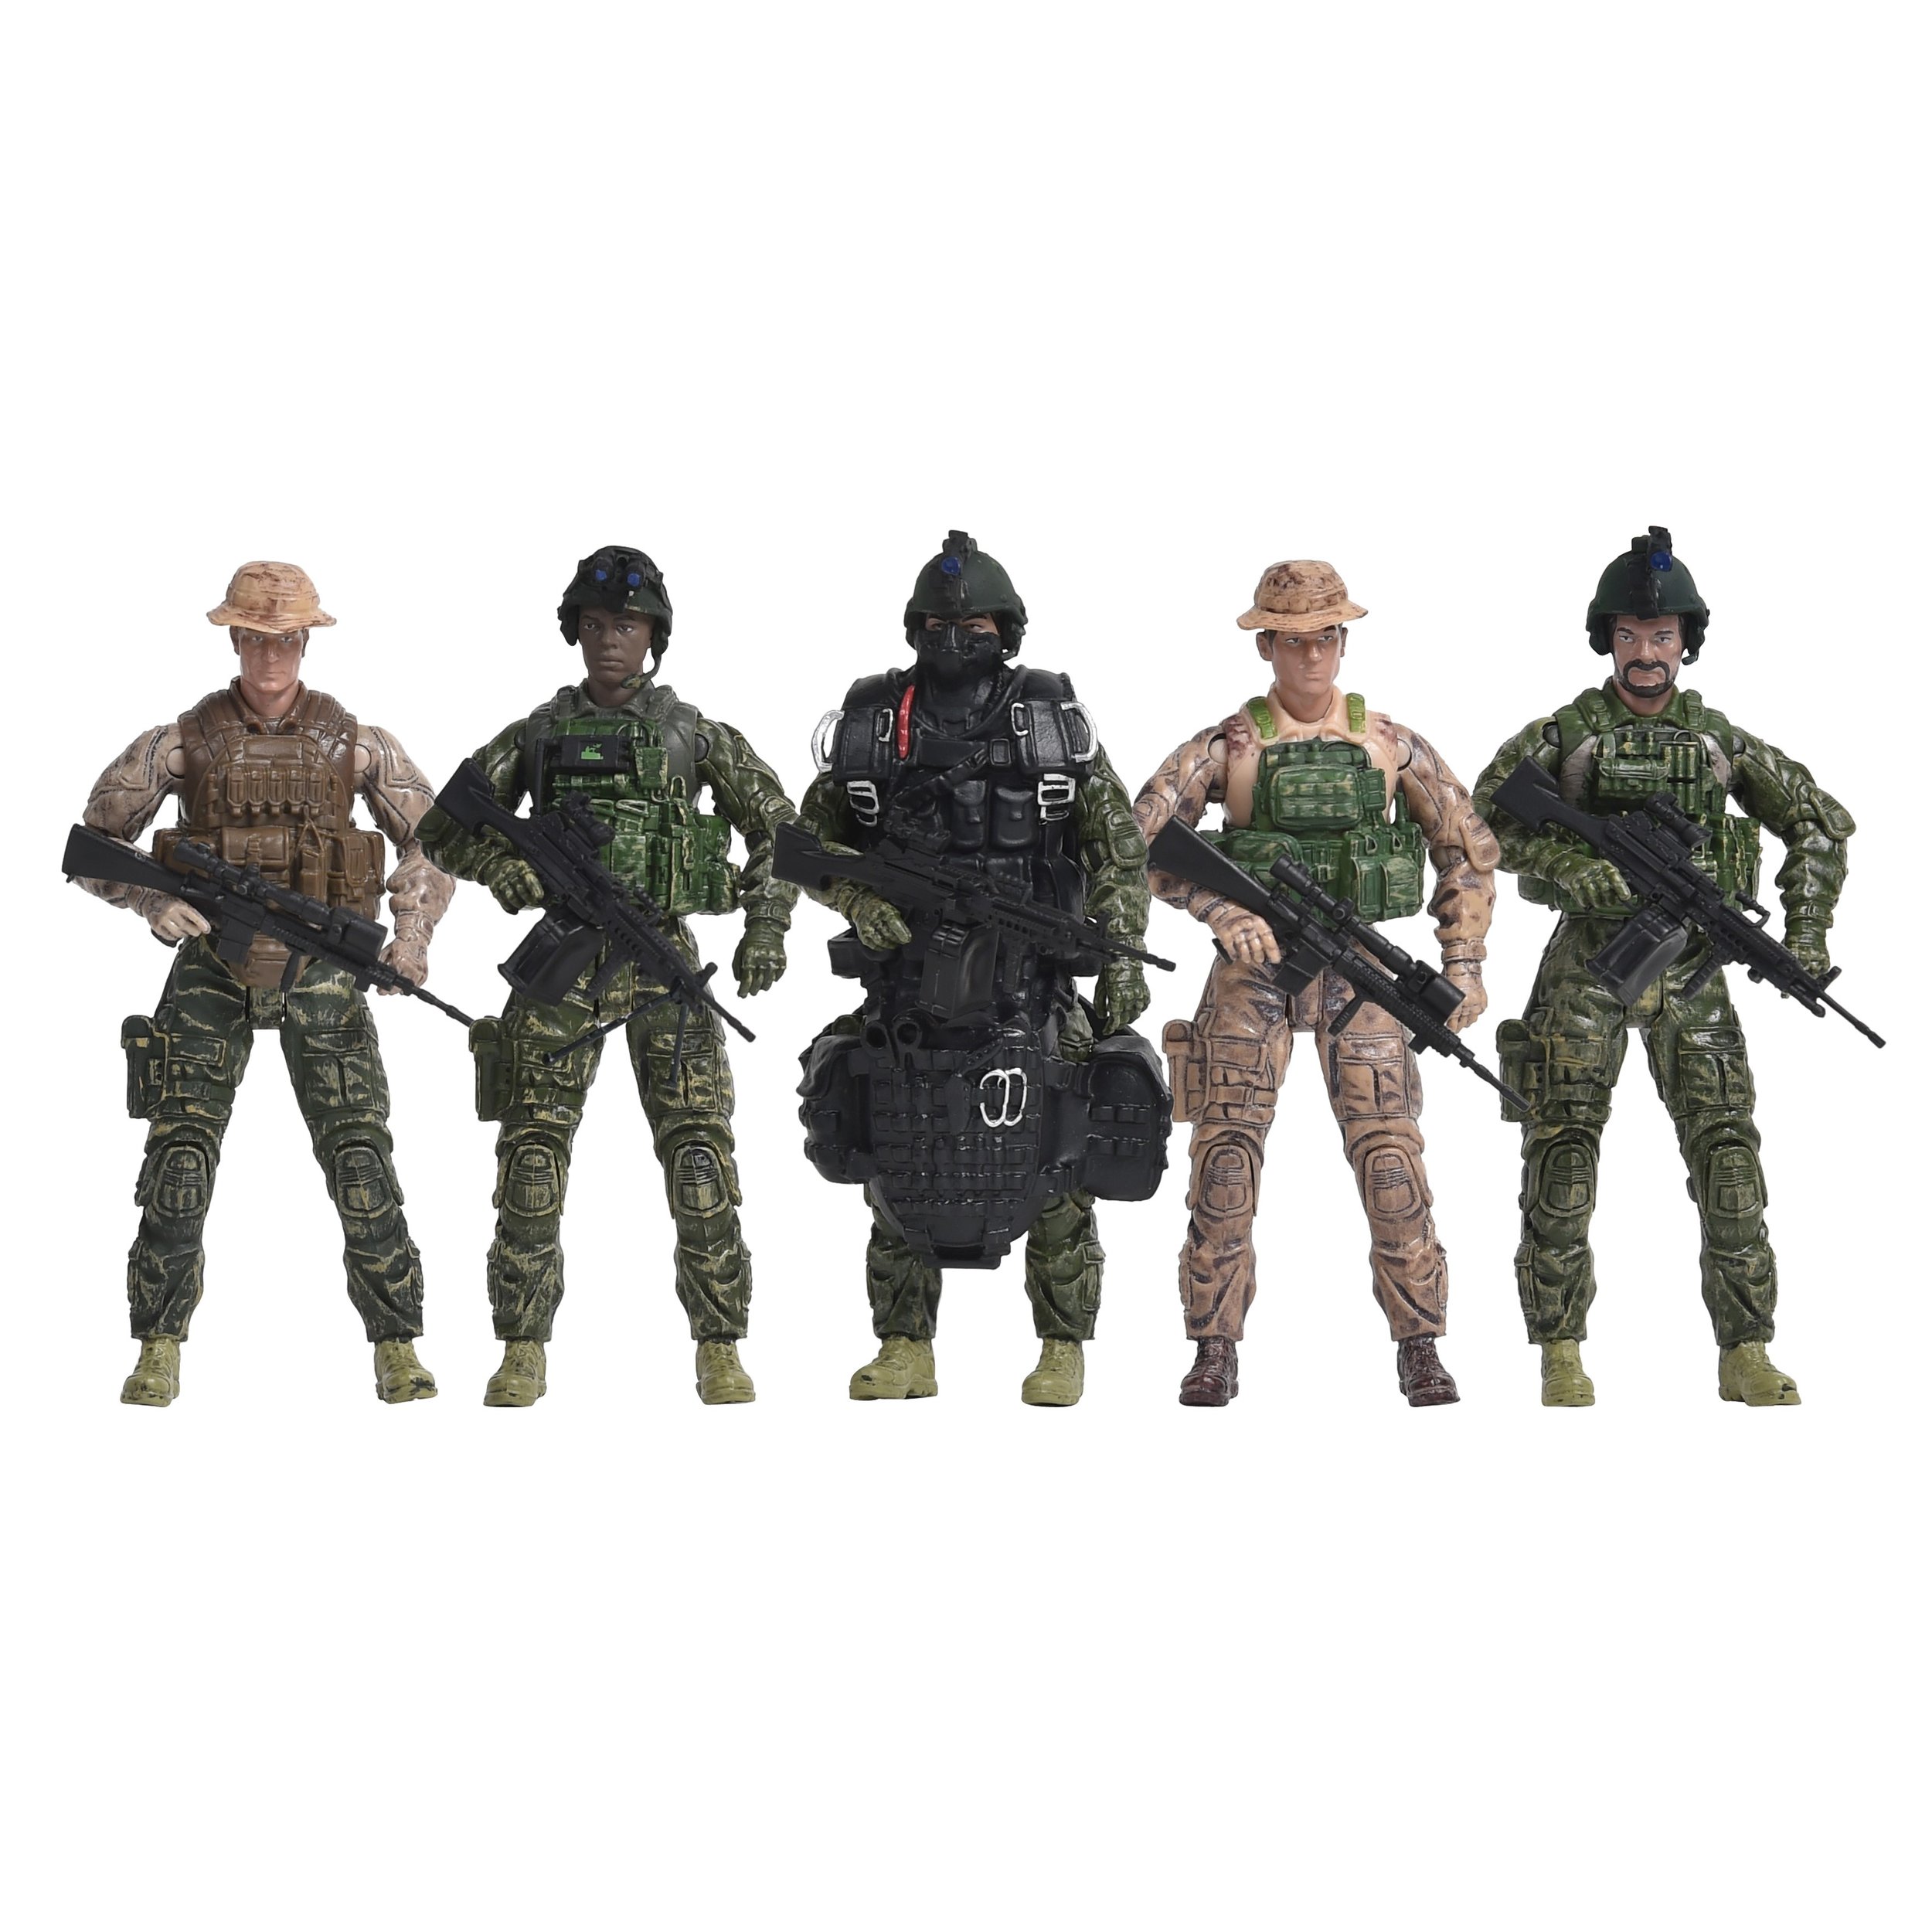 Sunny Days Entertainment Elite Force Army Rangers 5 Pack Figures Toy 